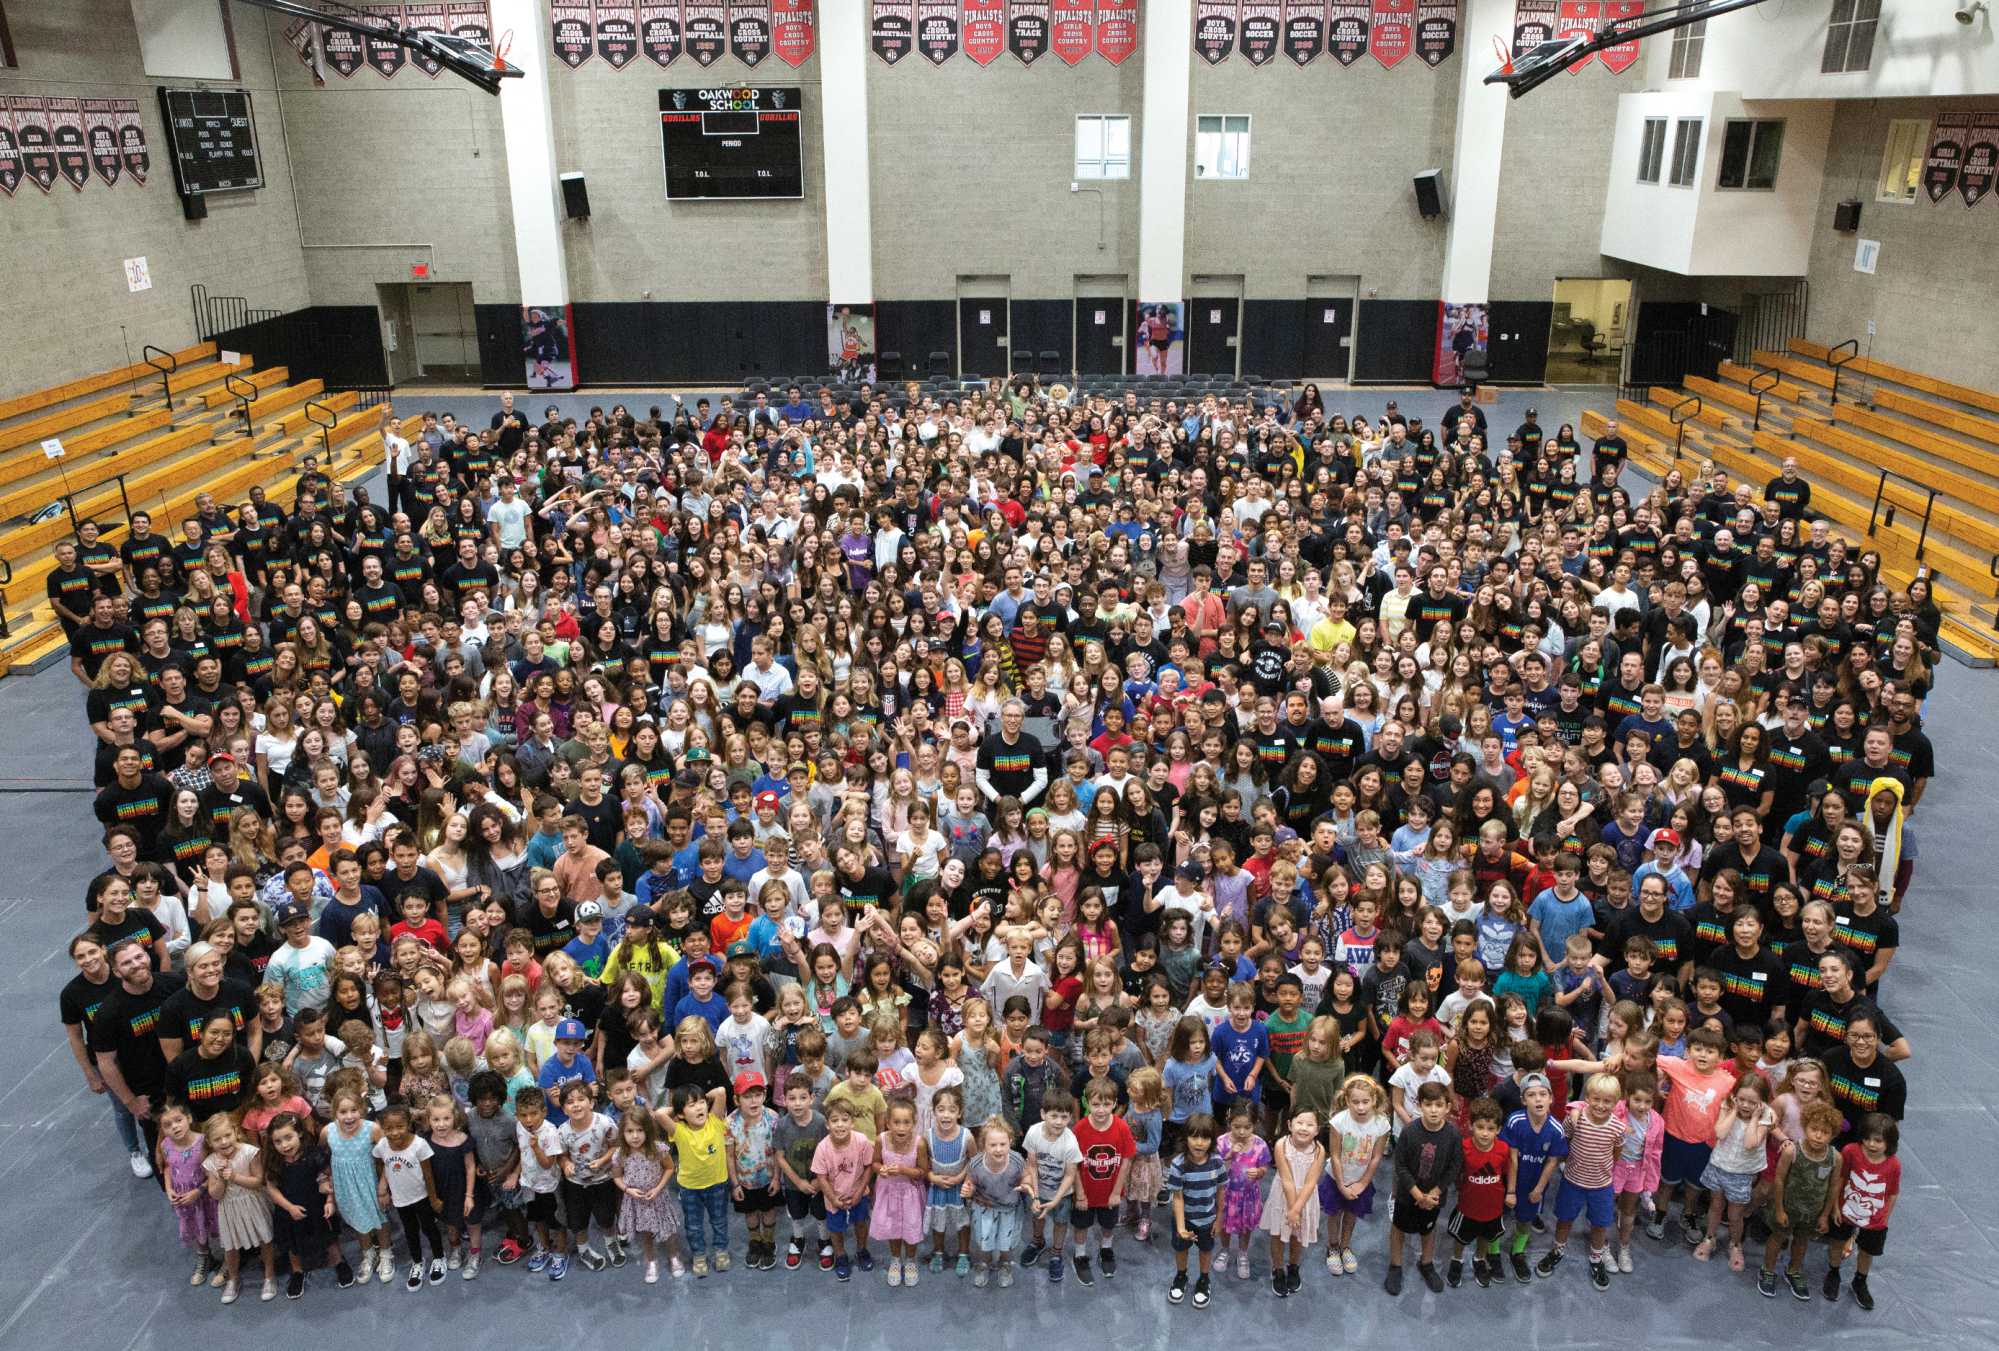 Giant group photo with hundreds of people